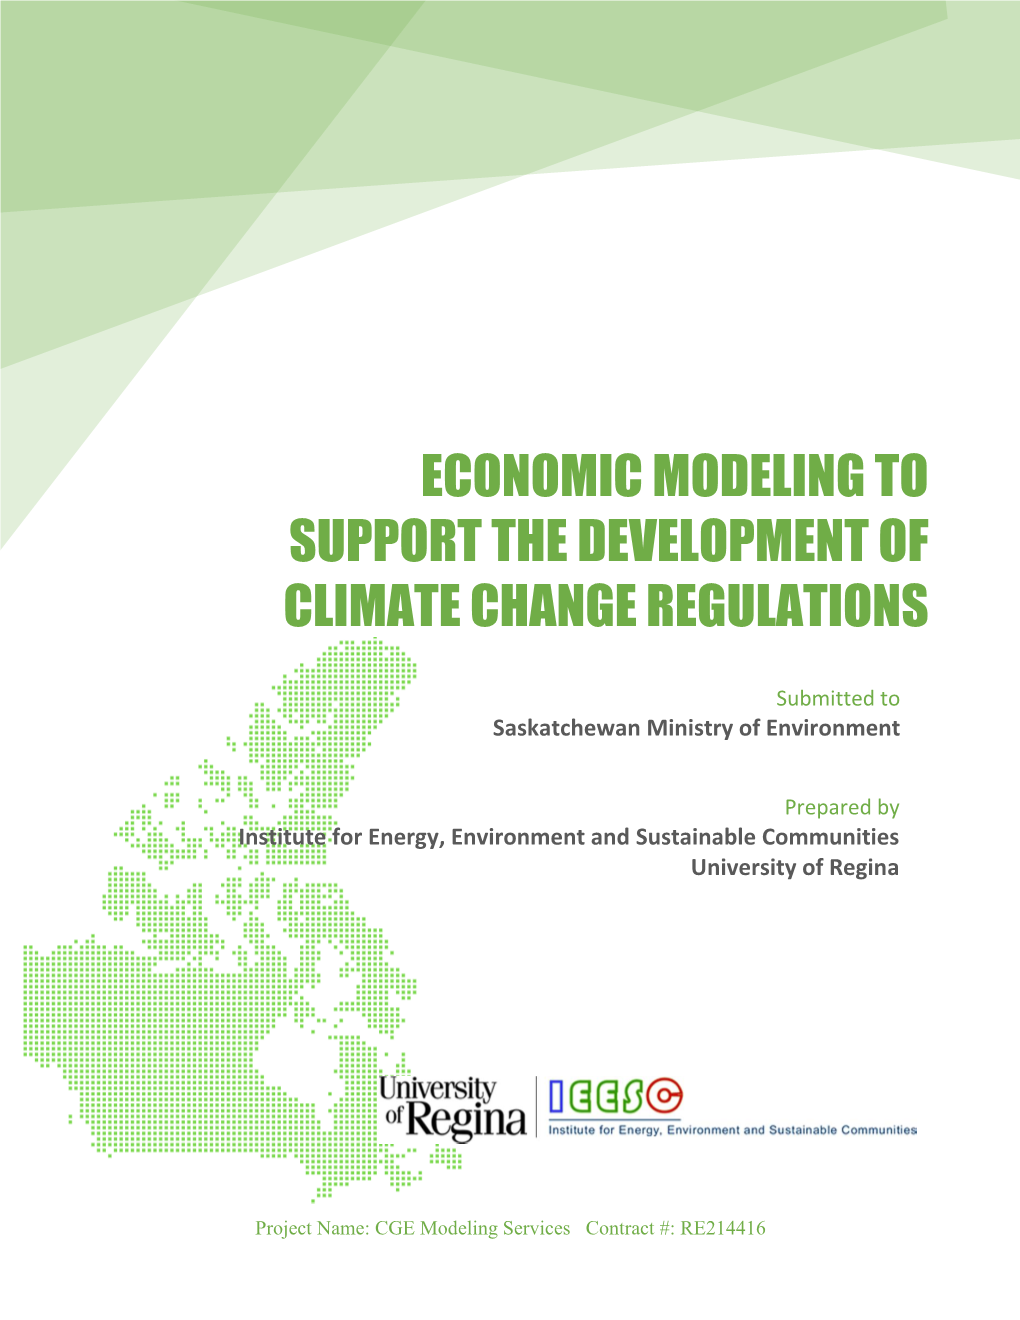 Economic Modeling to Support the Development of Climate Change Regulations